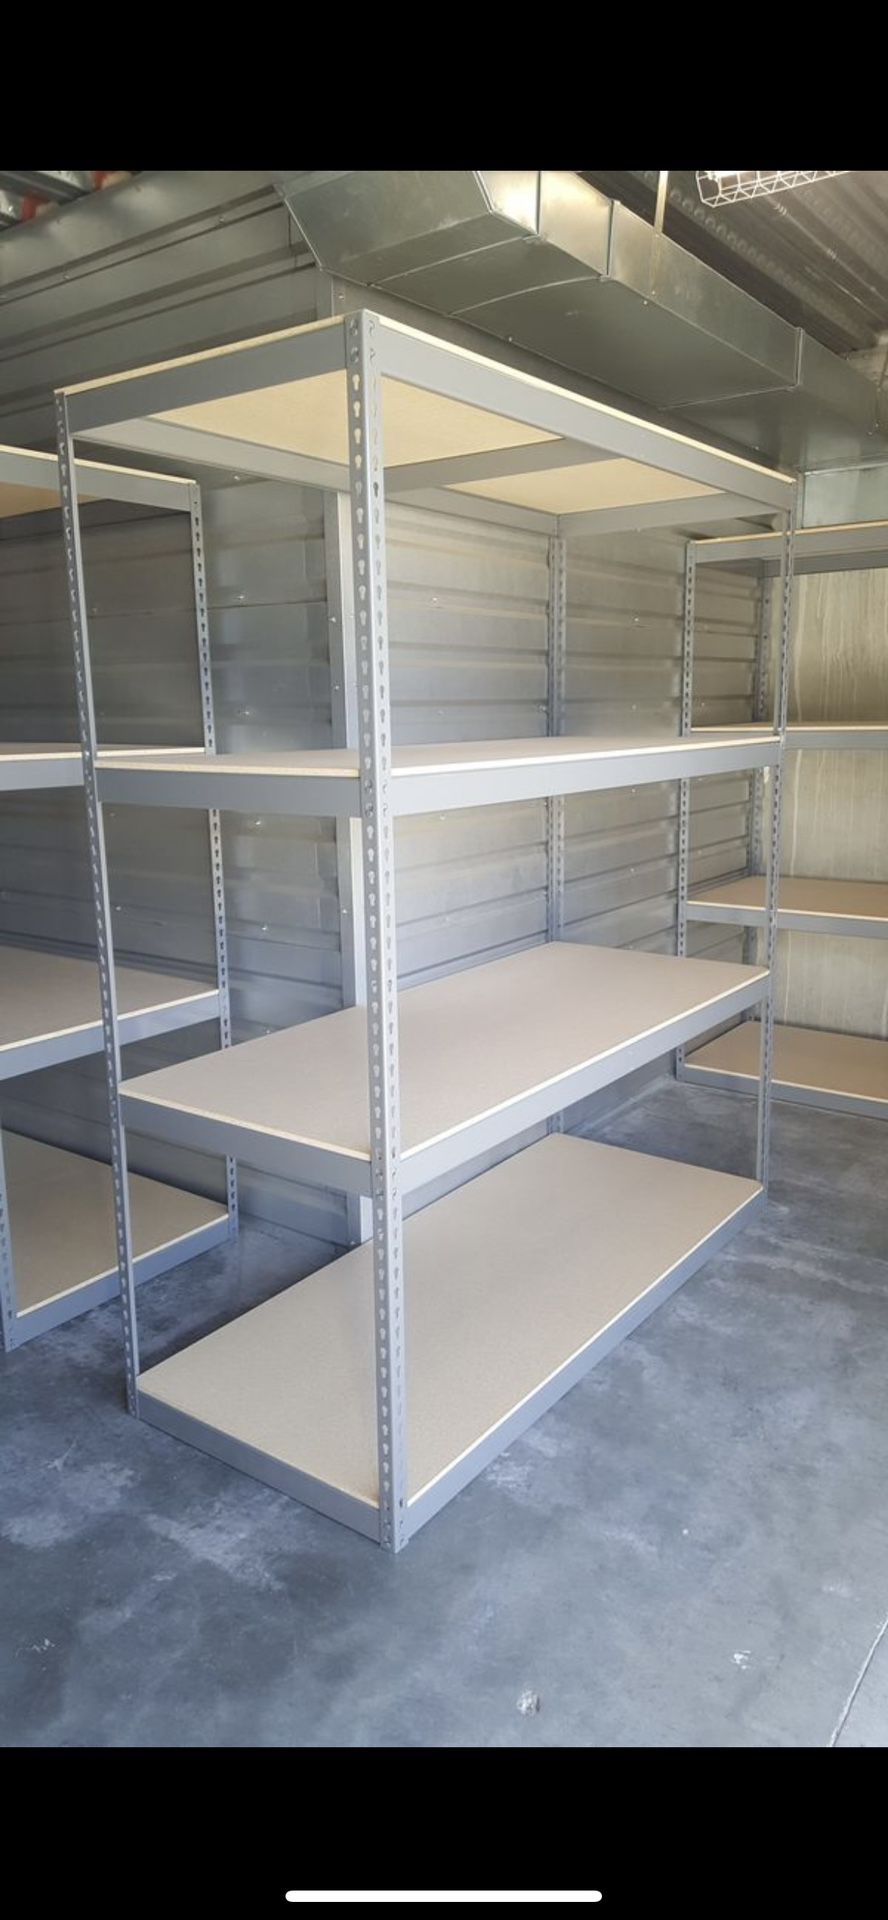 Warehouse Shelving 72 in W x 30 in D Industrial Boltless Storage Racks Stronger Than Homedepot Lowes Delivery Available